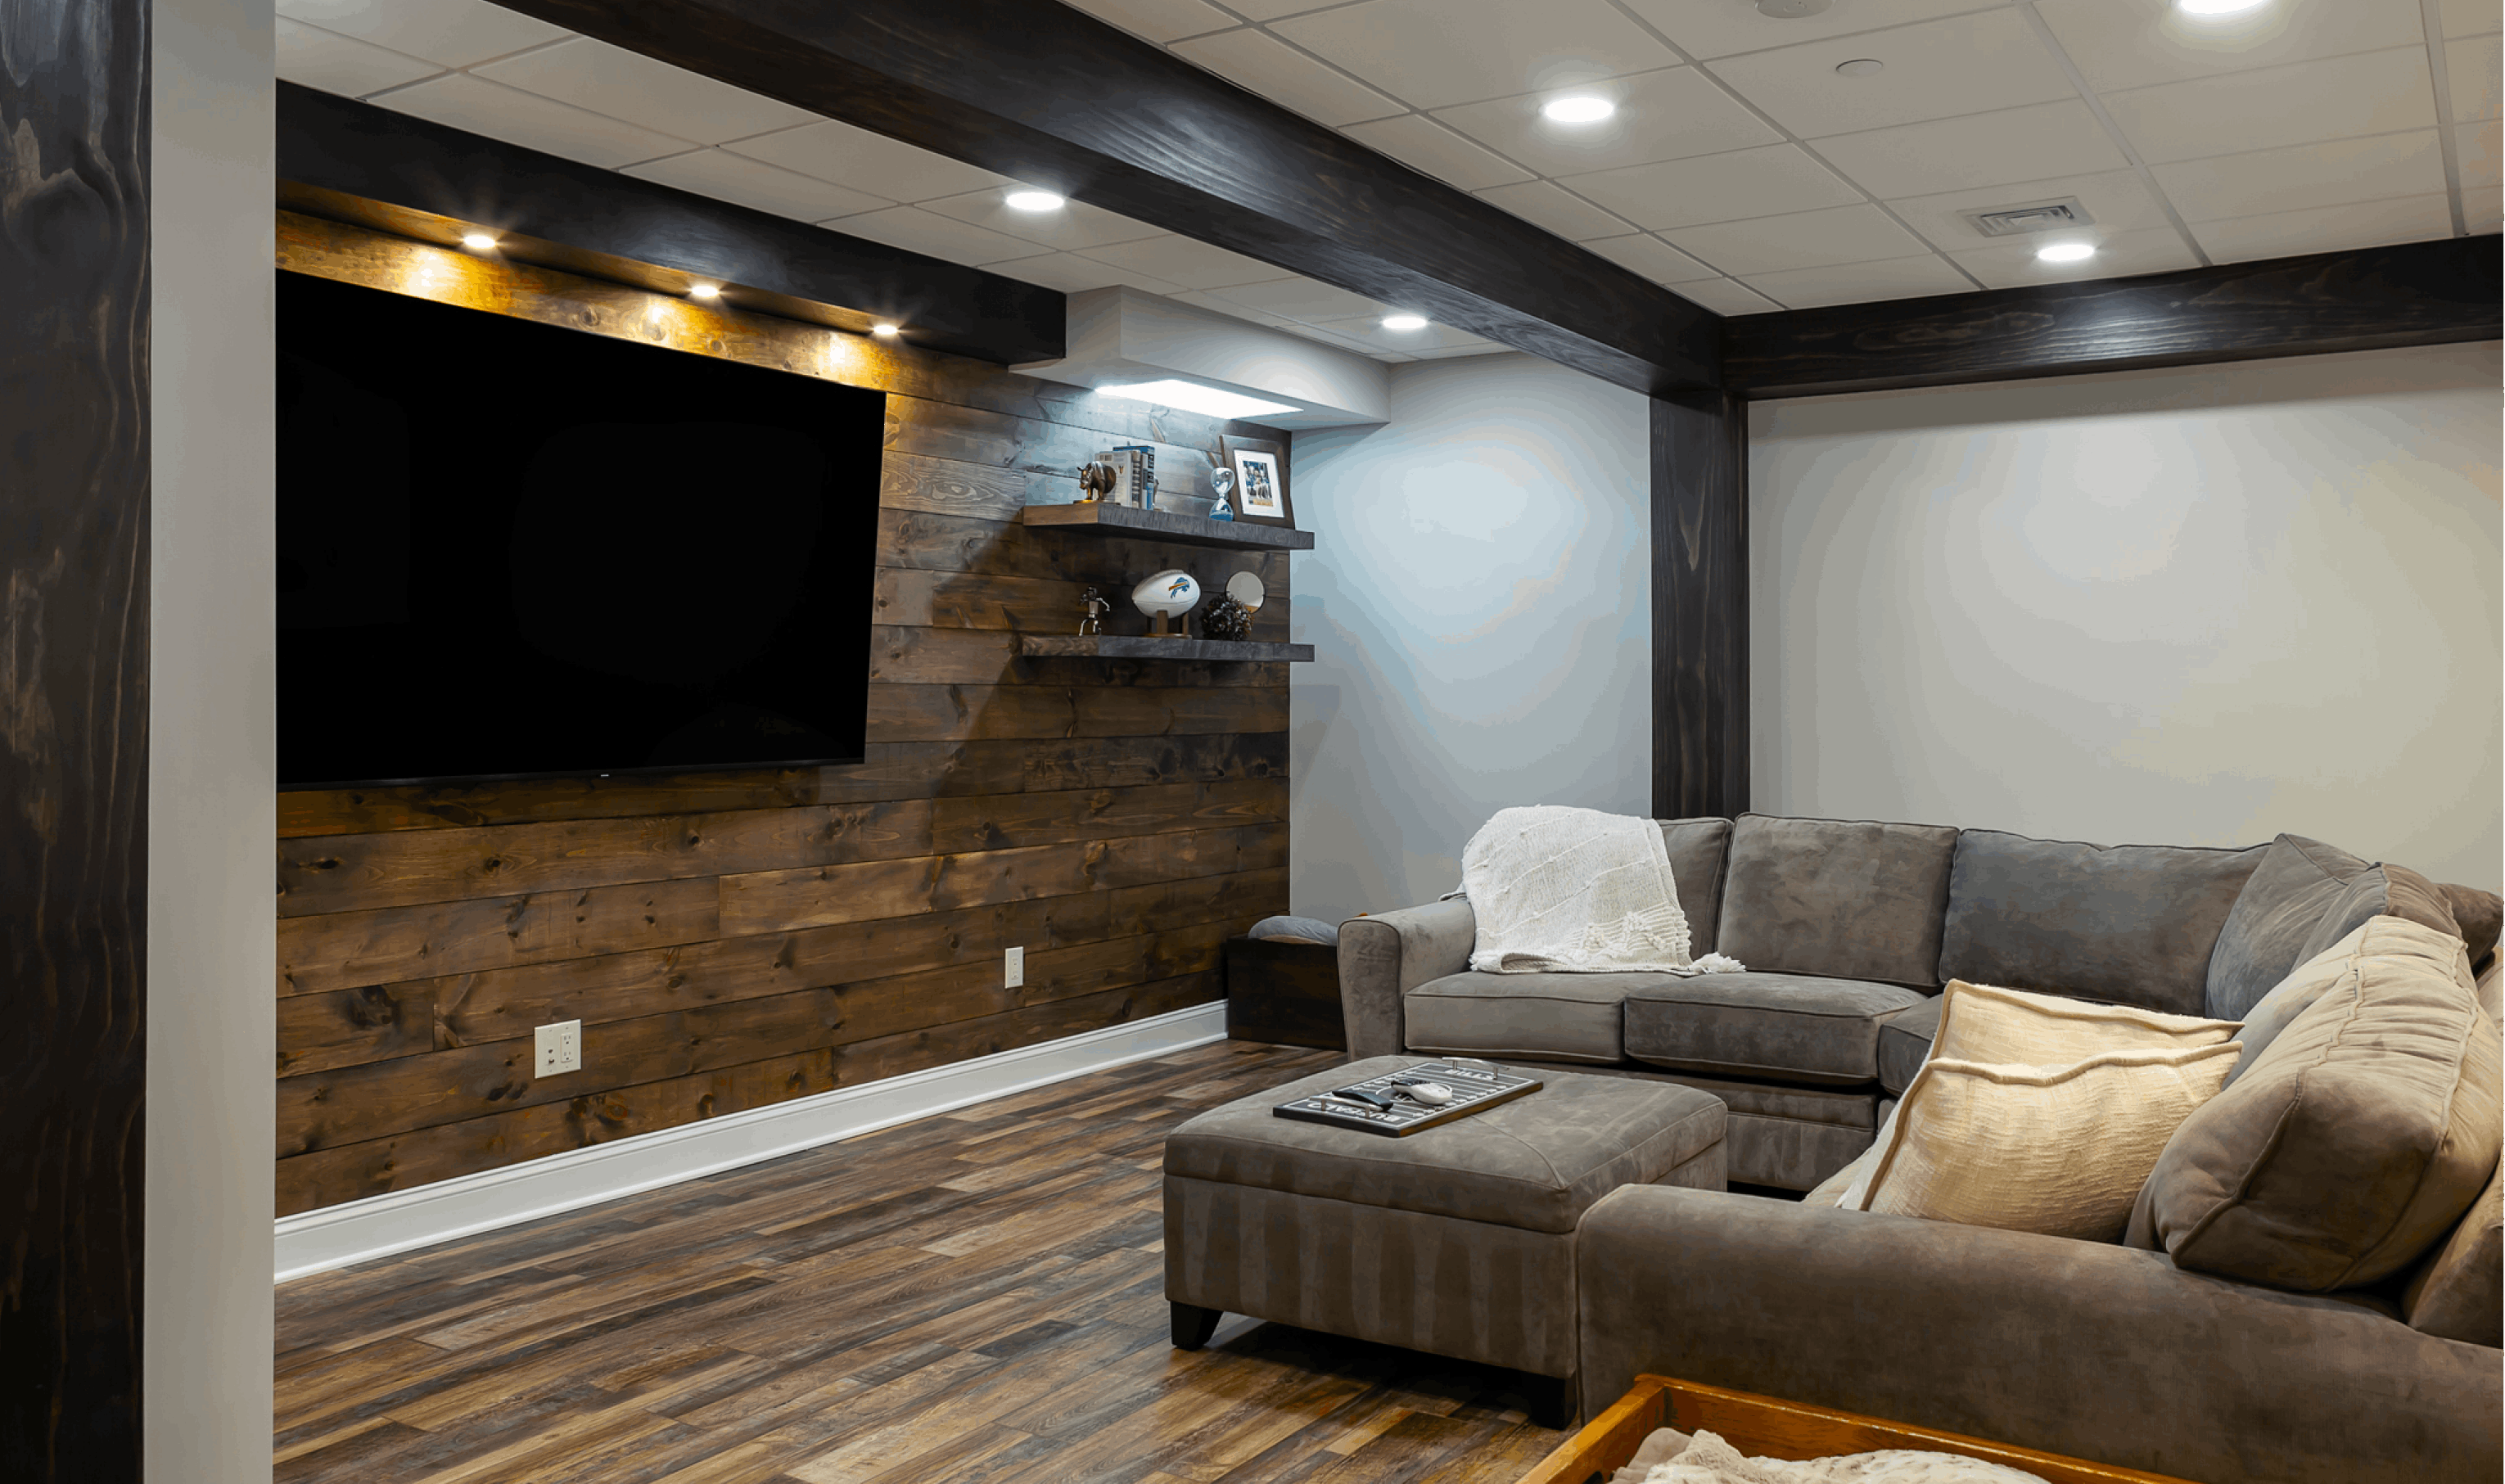 Rustic and moody entertainment space with thick dark wooden beams and rustic wood-paneled accent wall